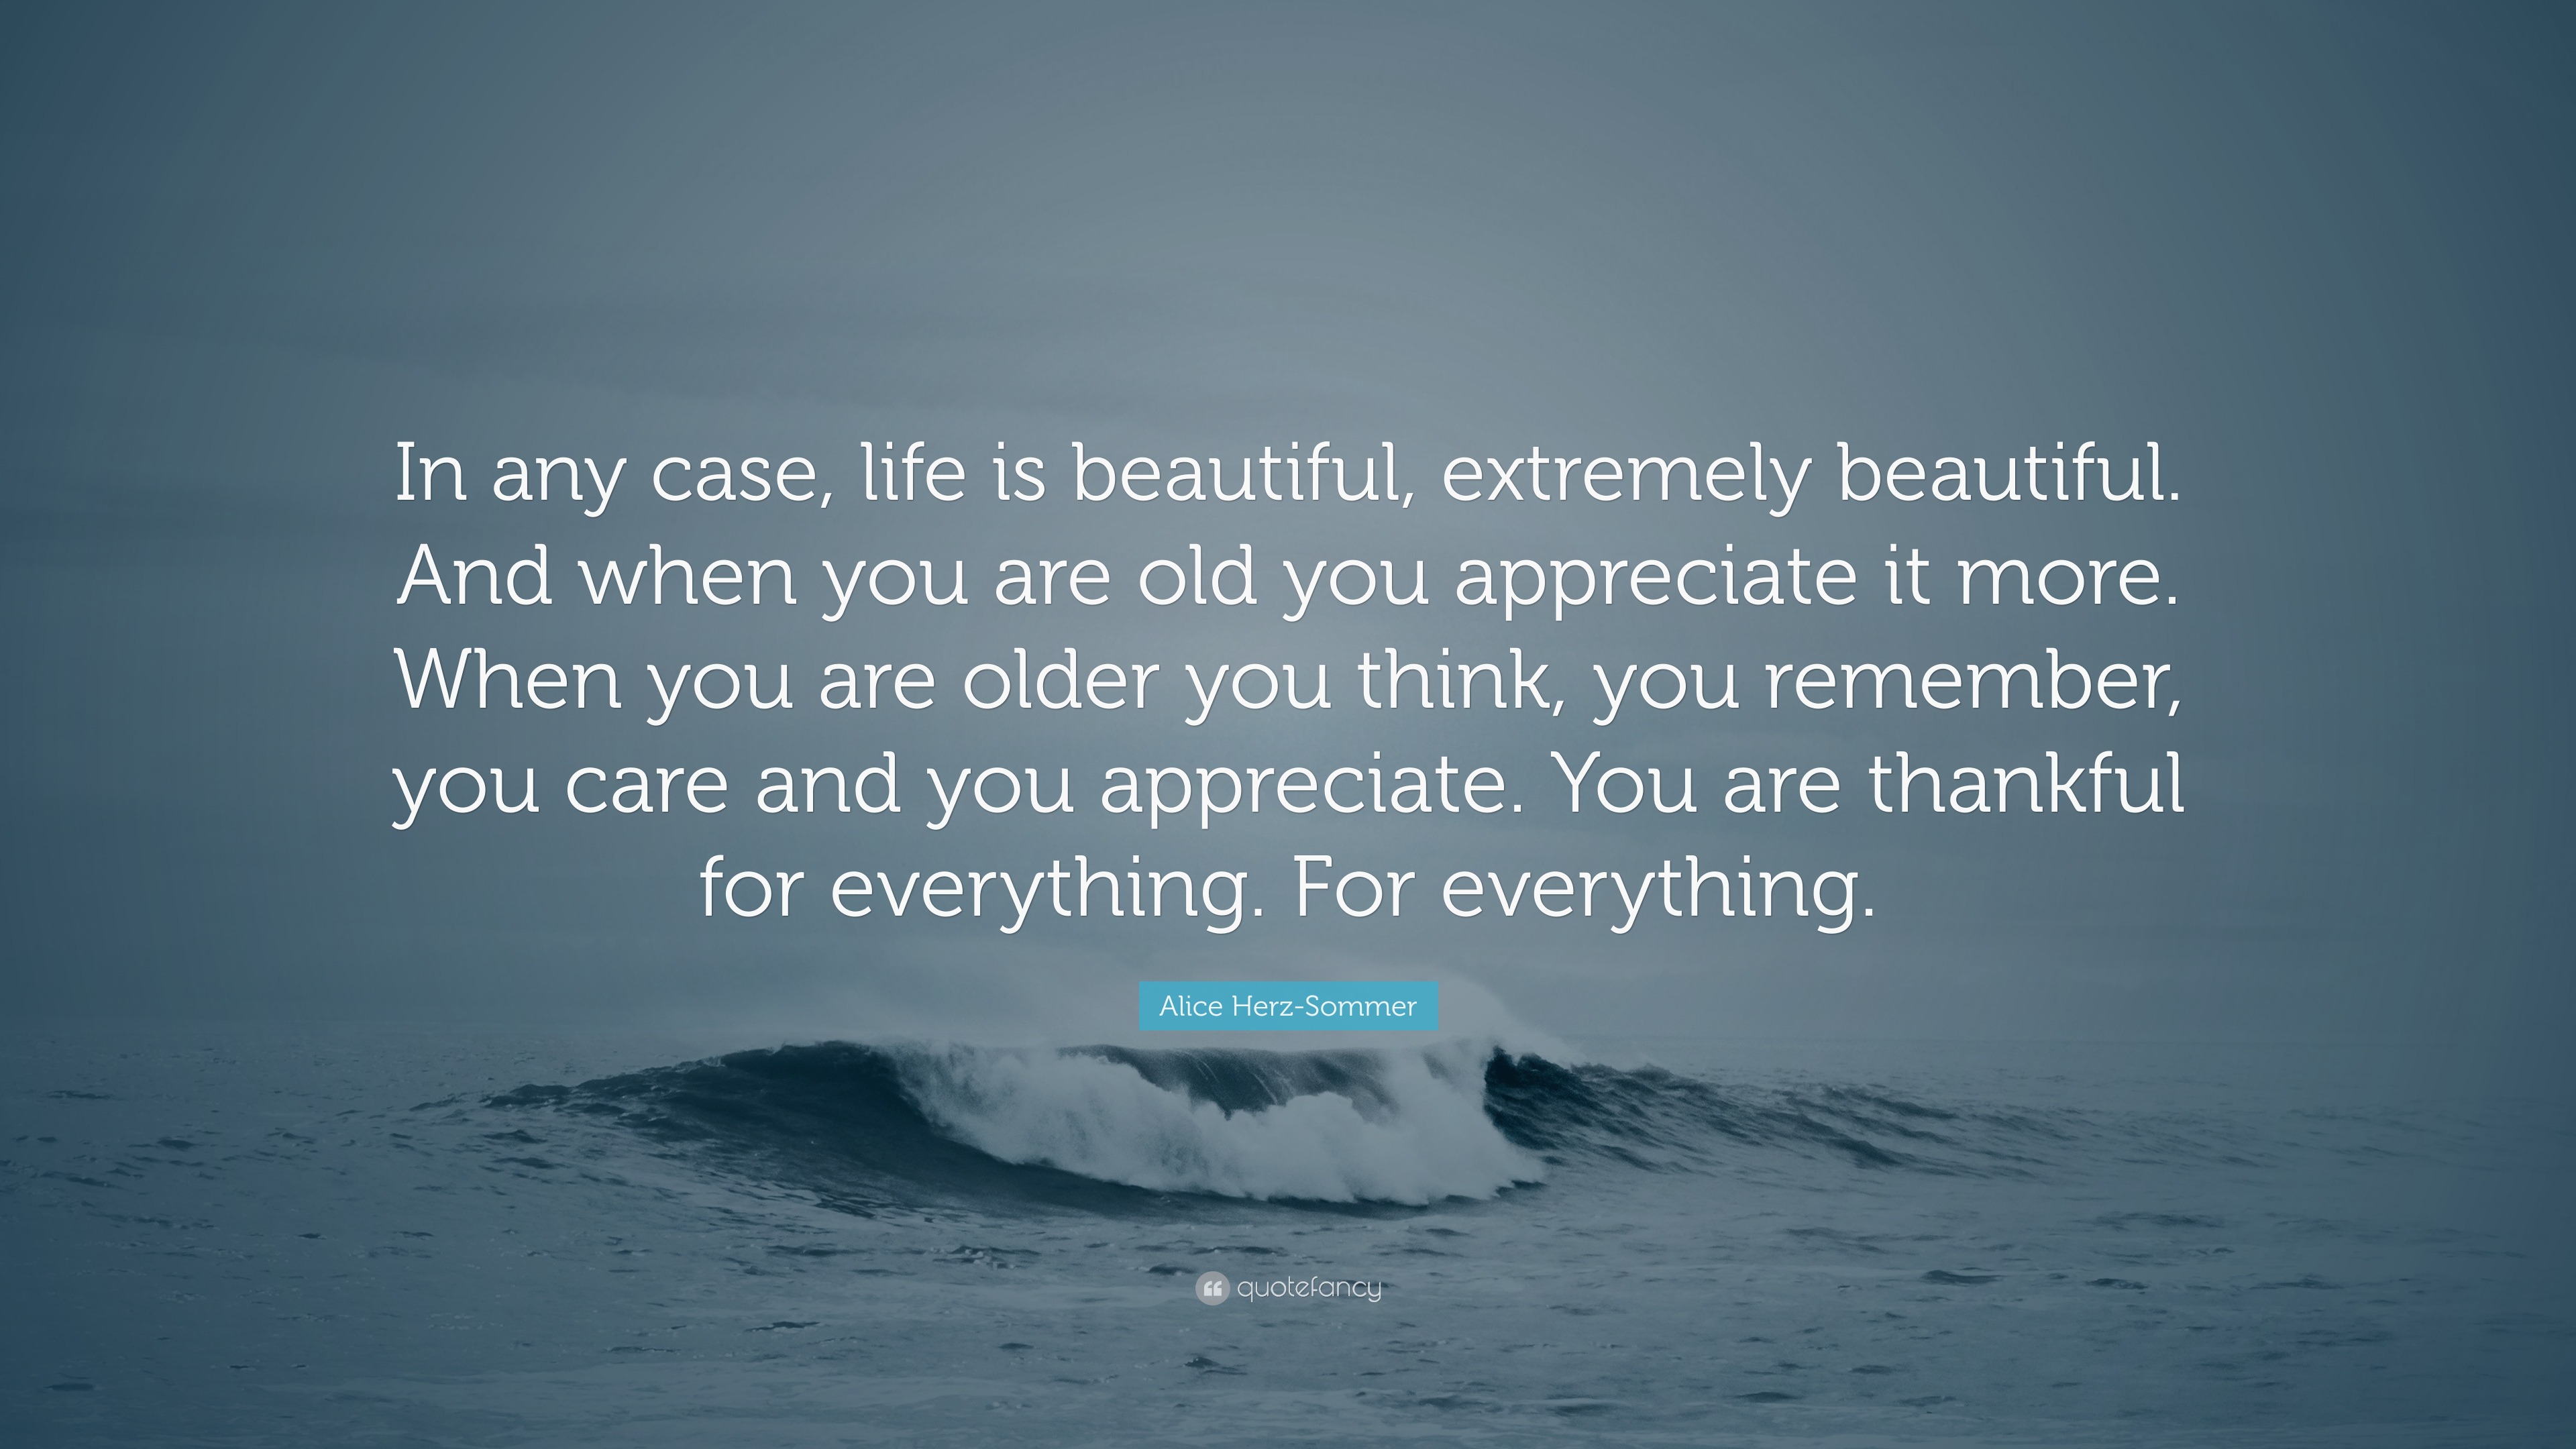 Alice Herz Sommer Quote “In any case life is beautiful extremely